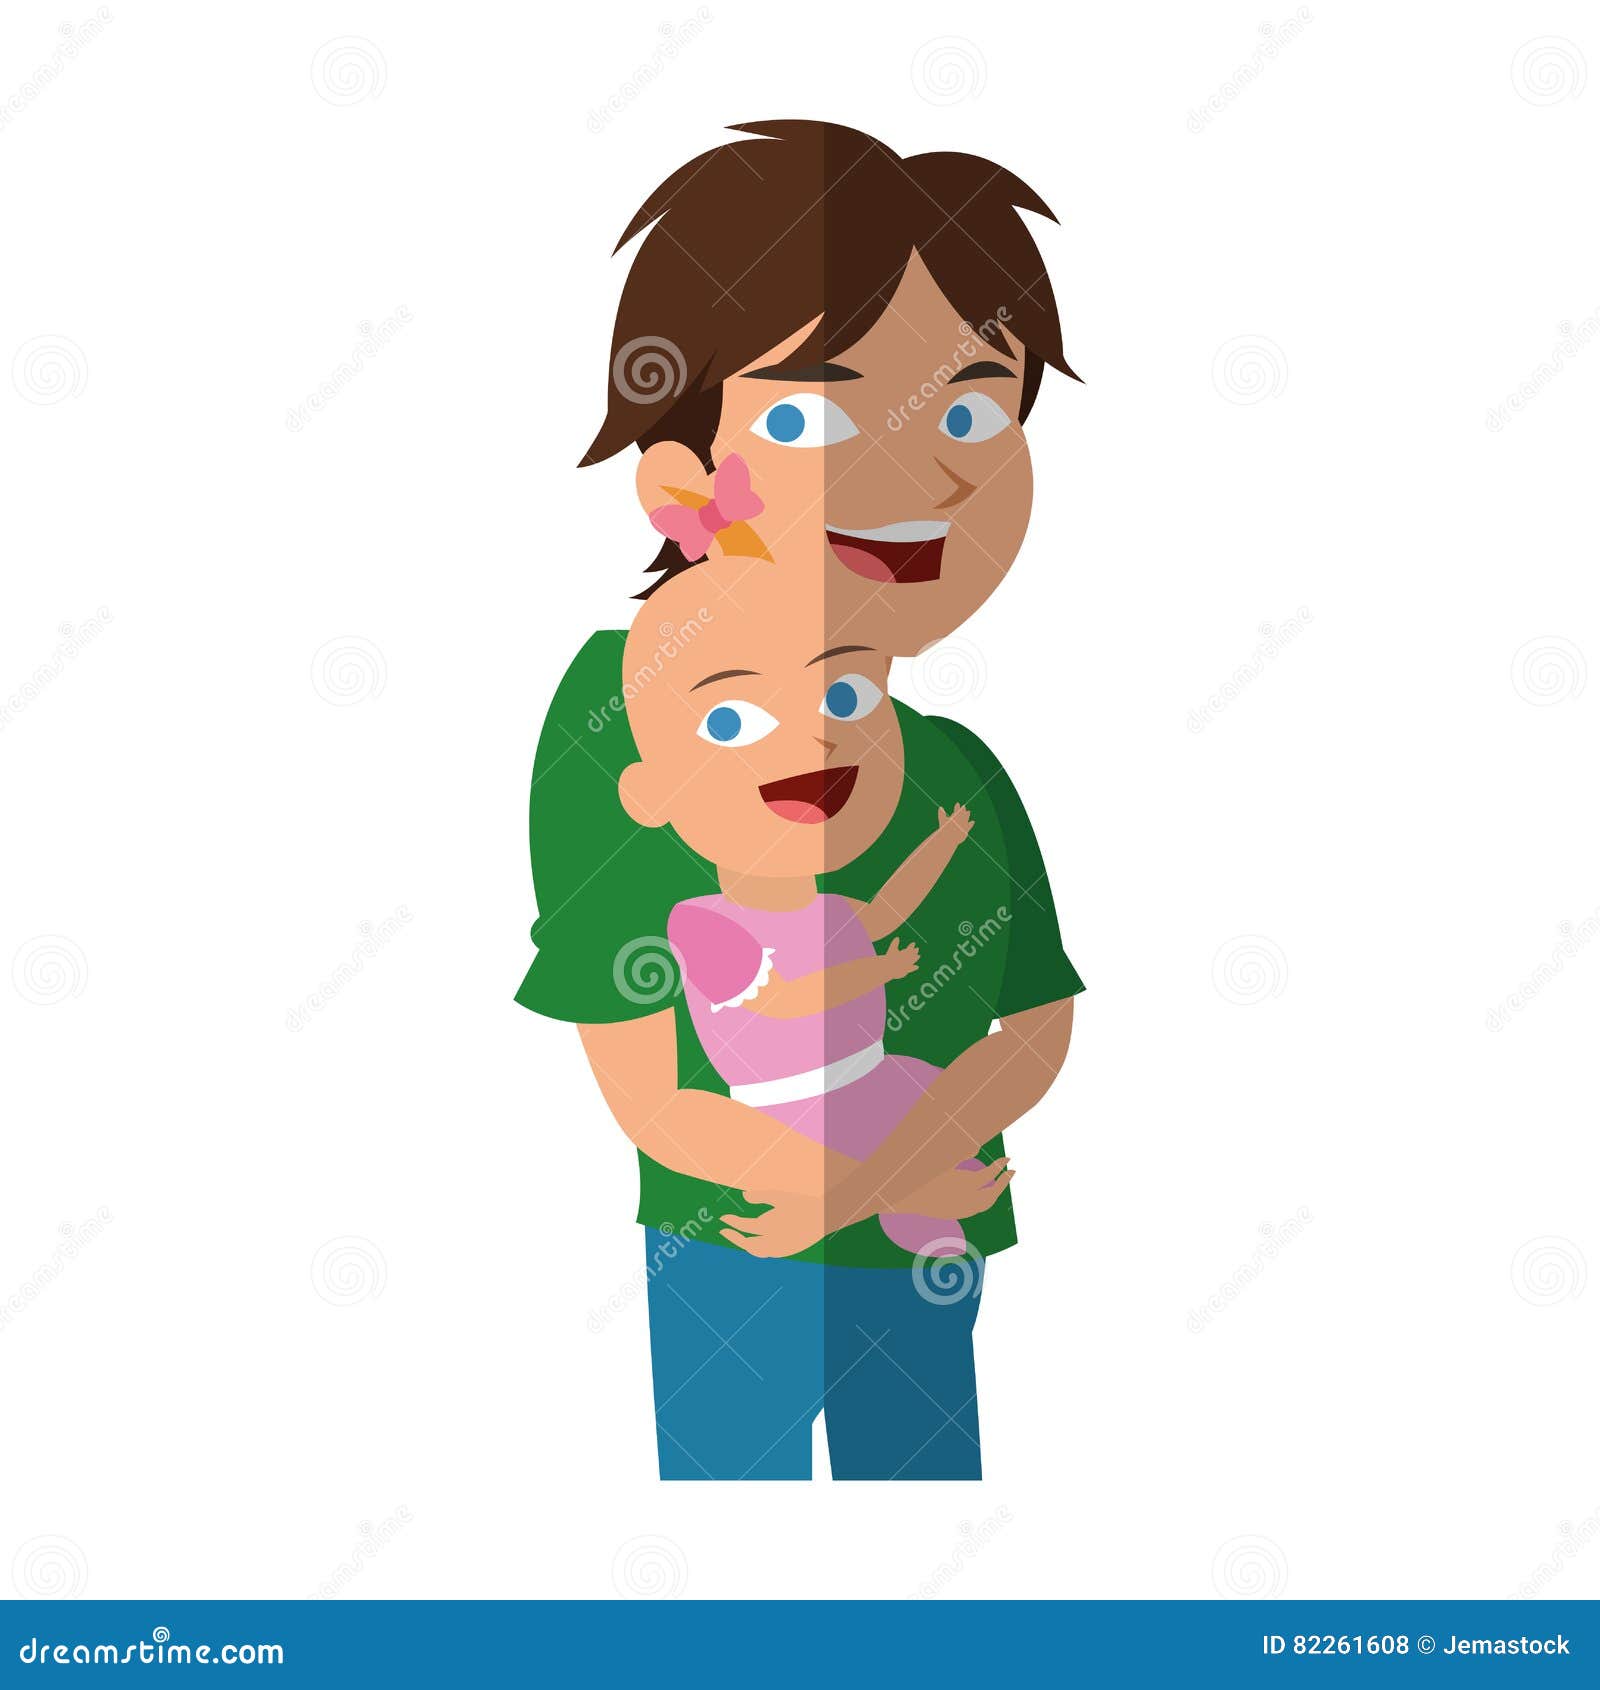 Isolated Baby And Brother Cartoon Design Stock Vector - Illustration of